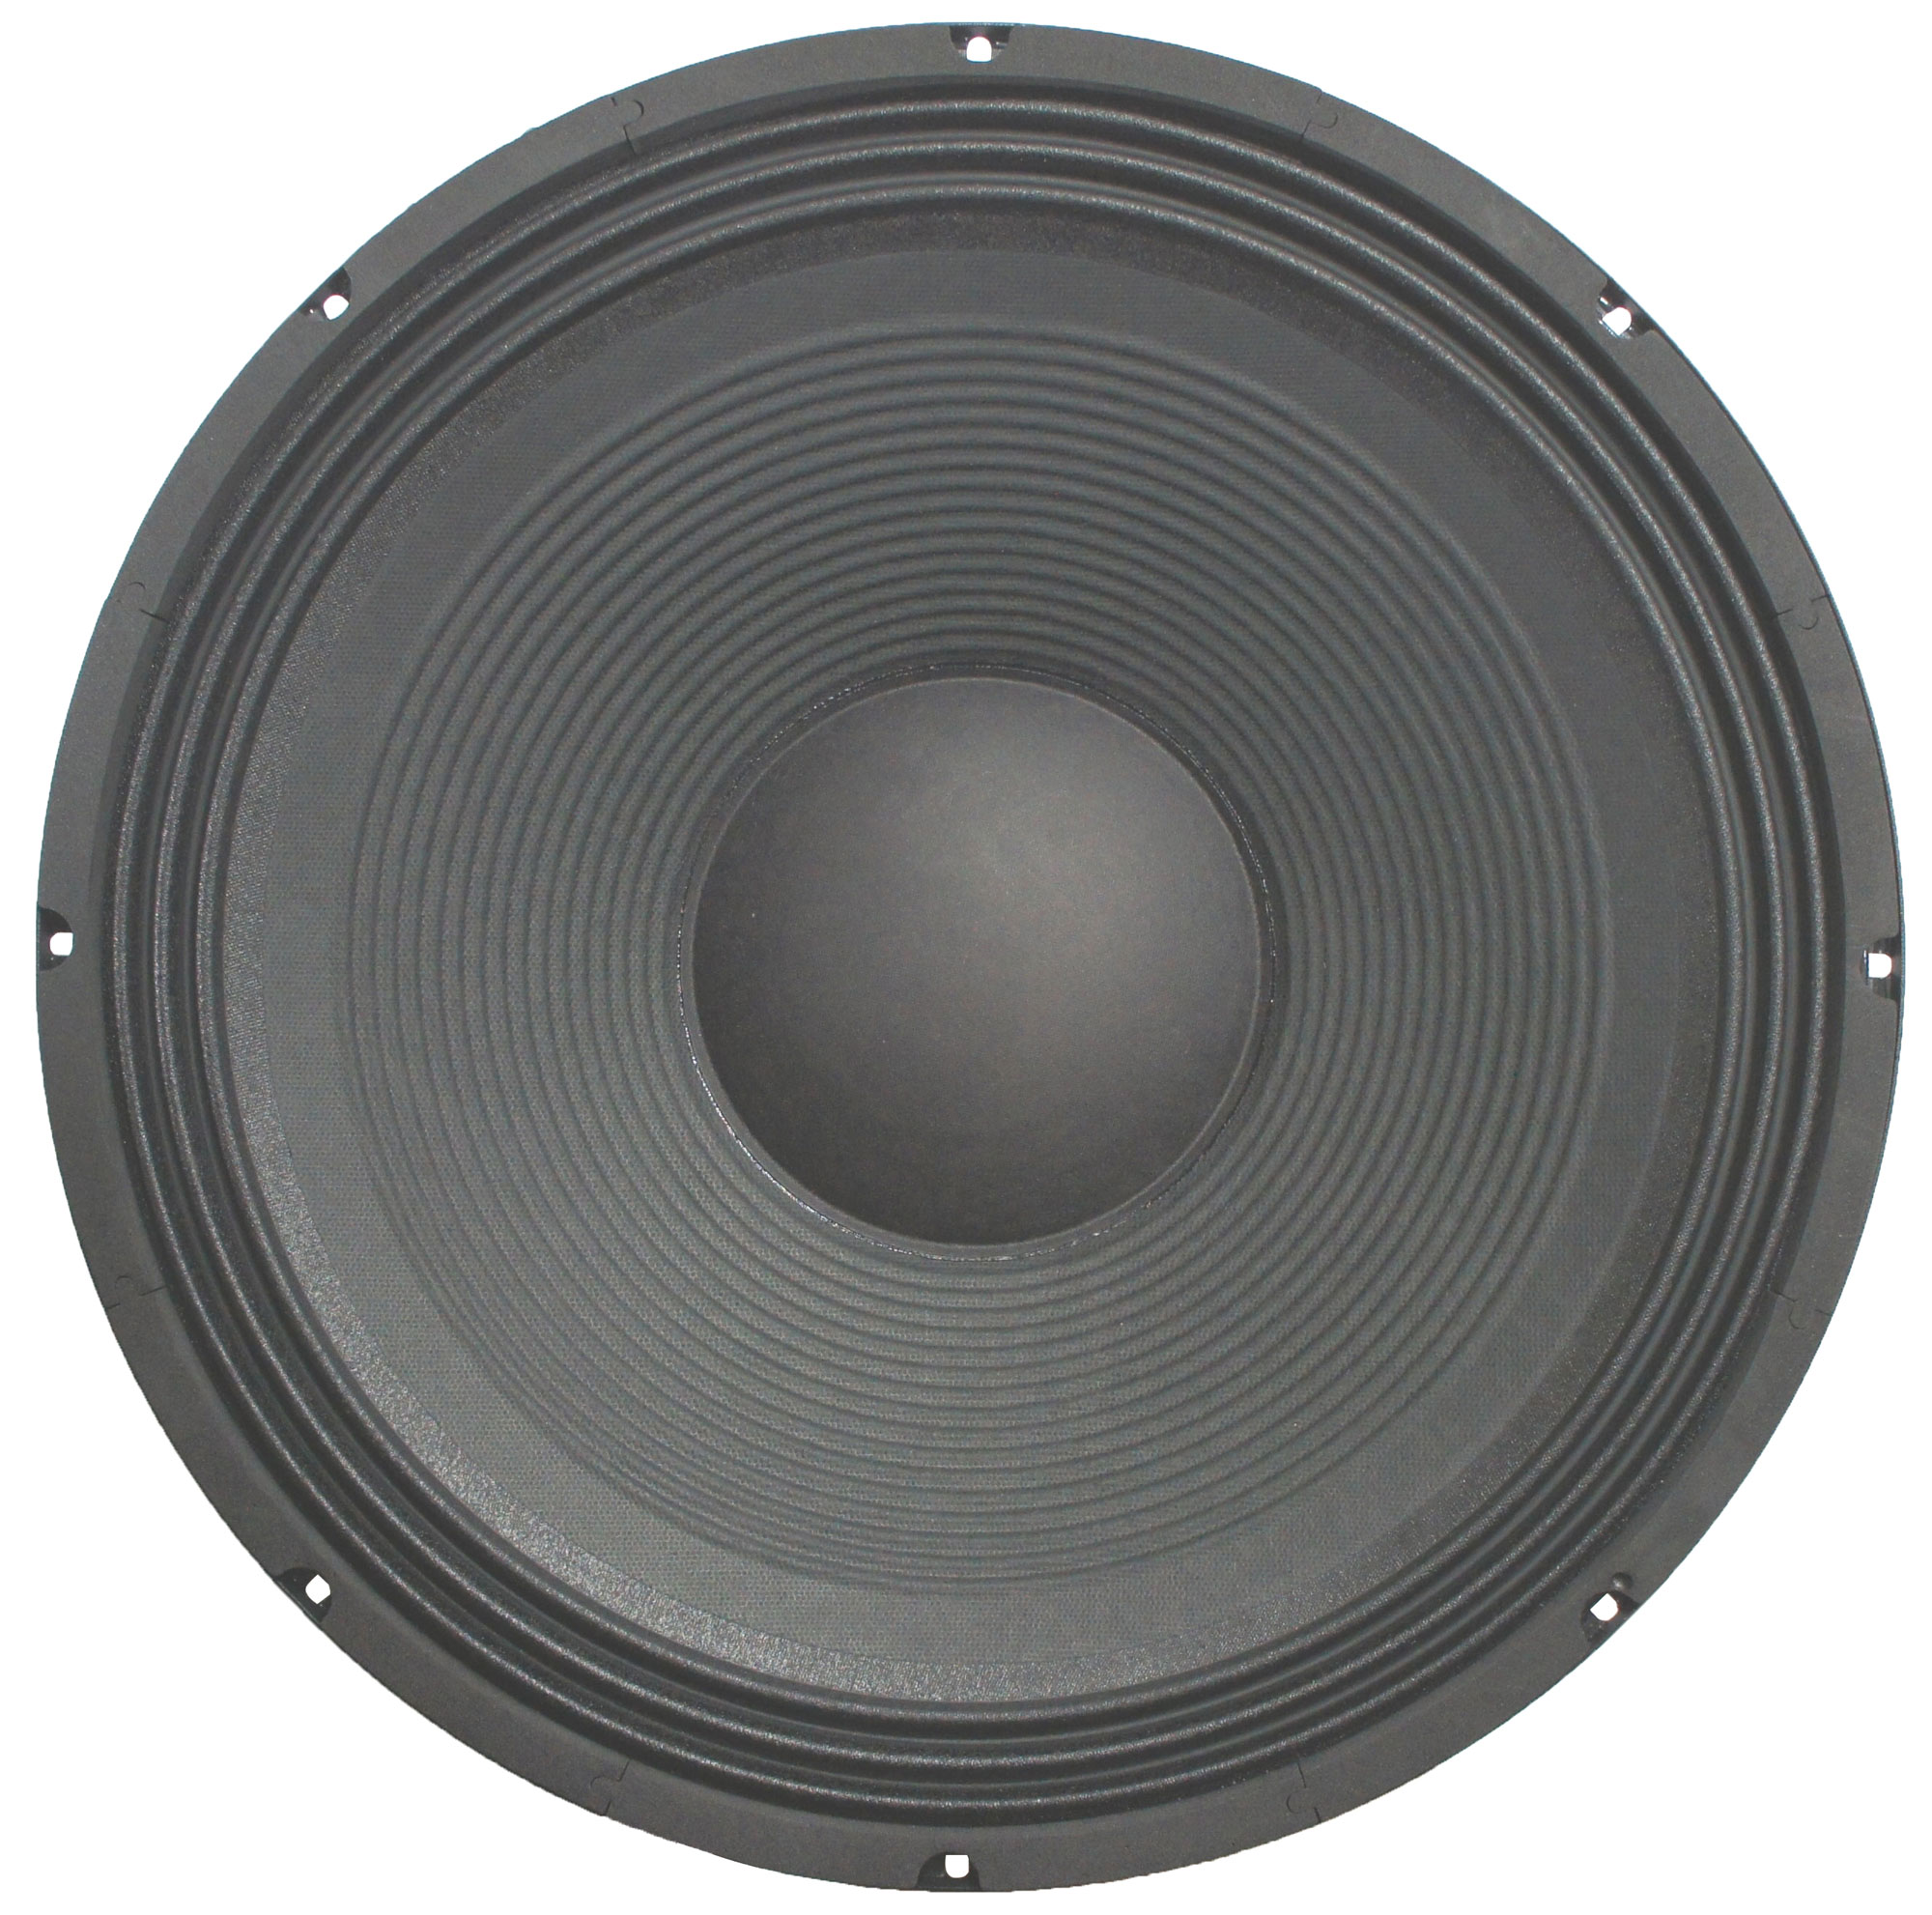 4x Harmony HA-P18"WS8 Raw Replacement 18" Pro PA 1200W Sub Speaker 8 Ohm Woofer - image 3 of 6